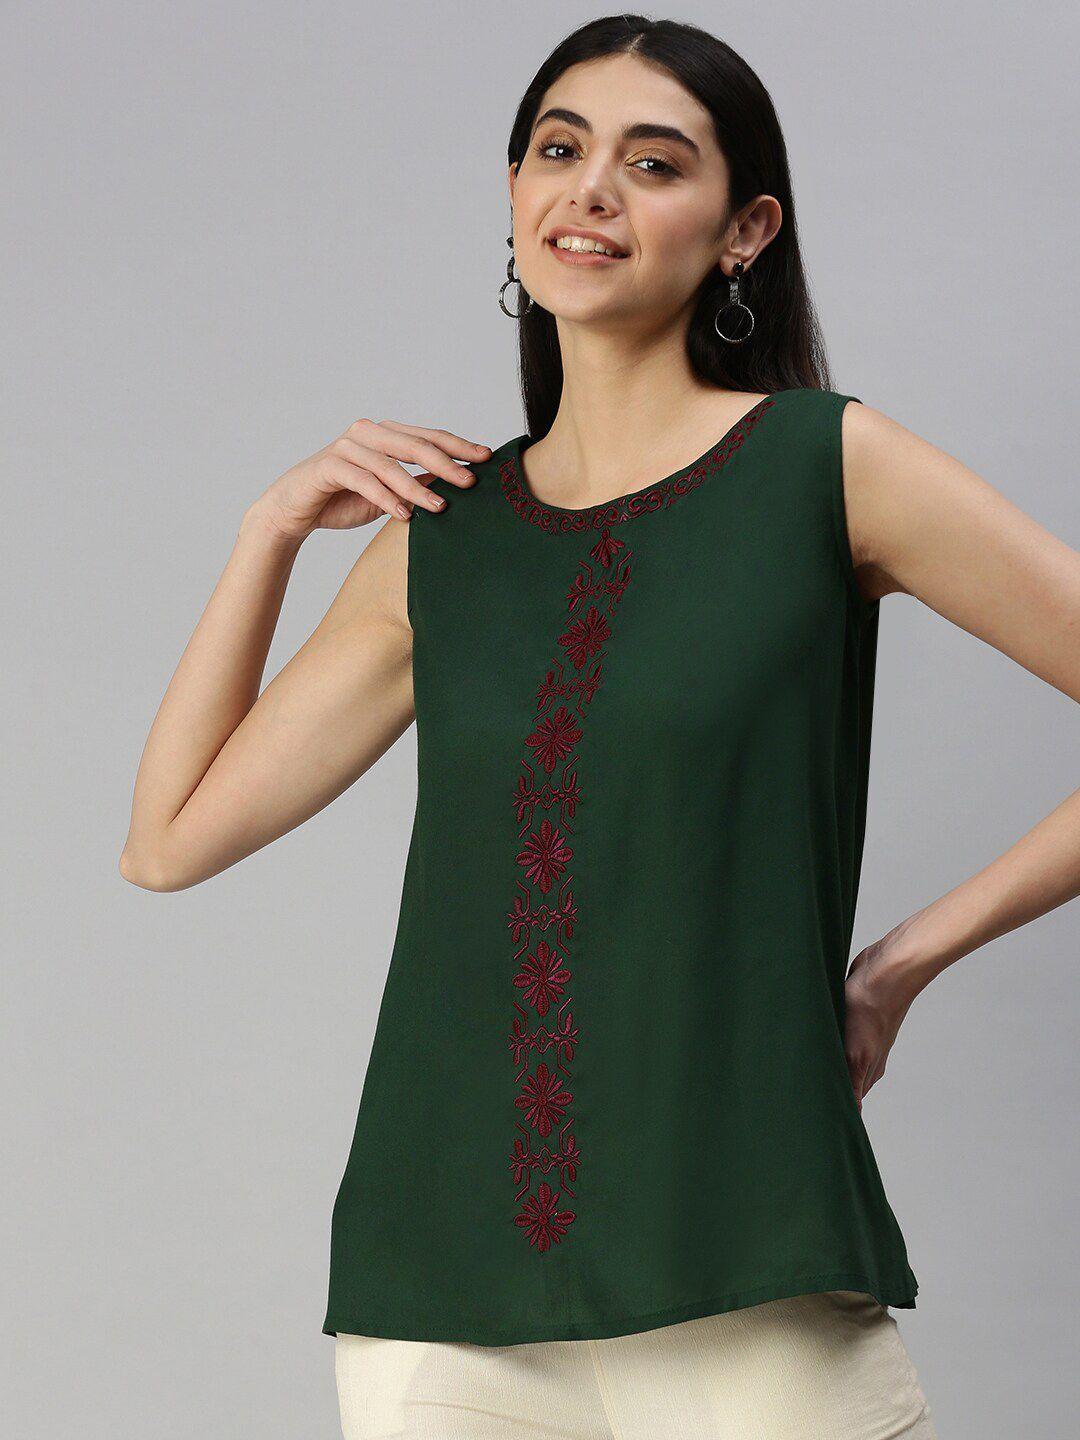 here&now sleeveless rayon floral embroidered top